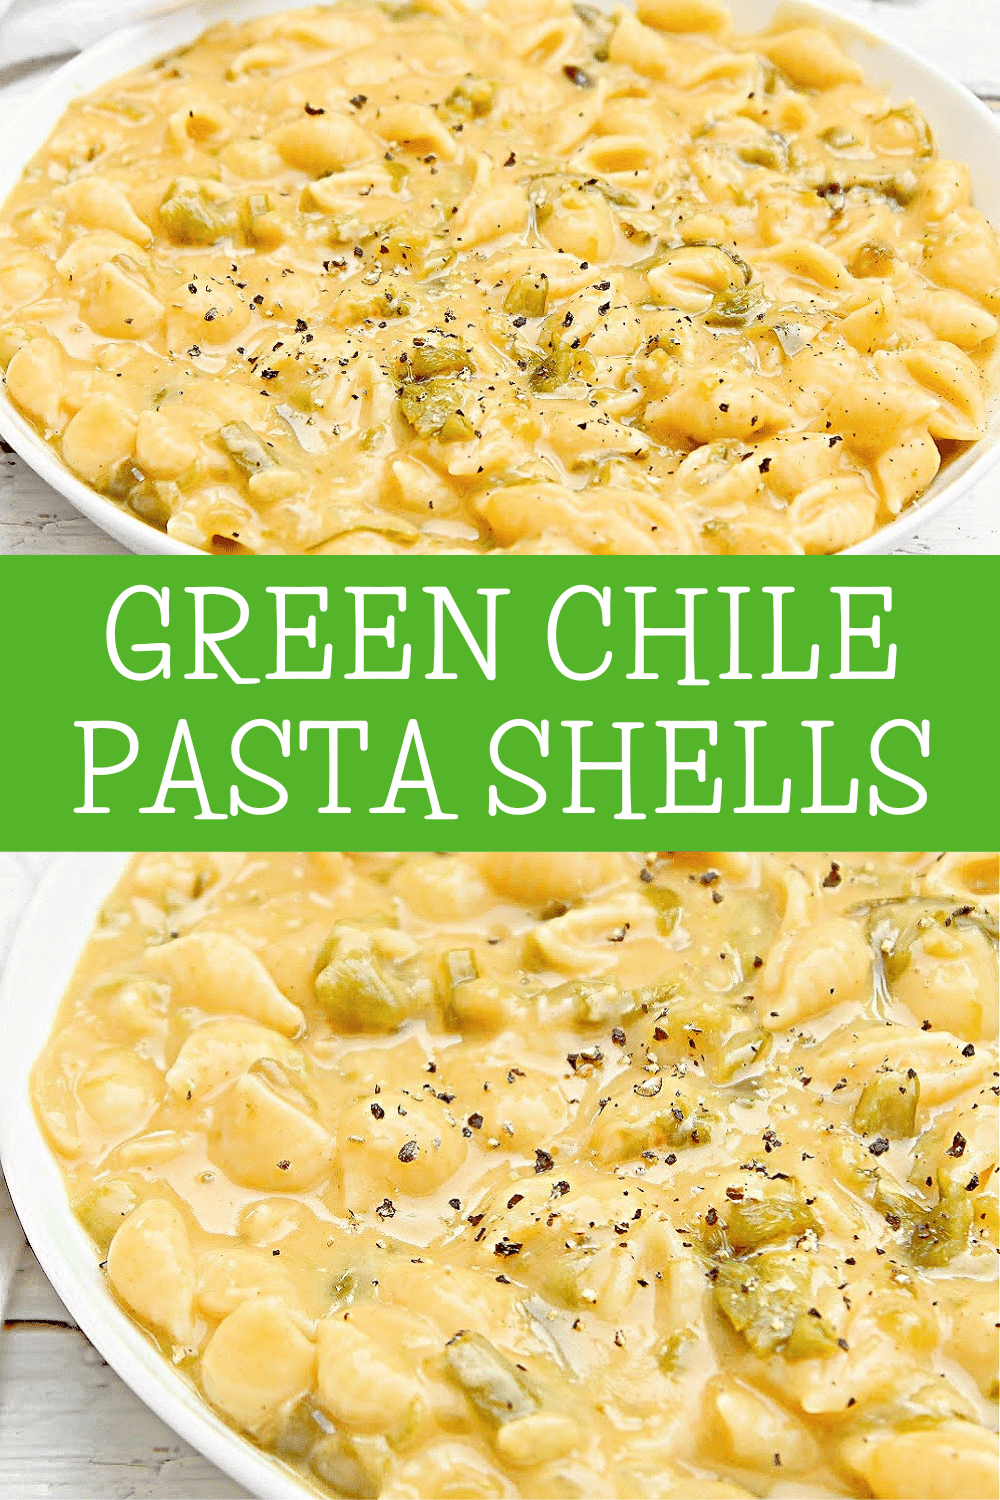 Green Chile Pasta ~ Tender pasta shells coated in a creamy cheese sauce infused with the subtle heat of green chiles. Easy weeknight dinner! via @thiswifecooks